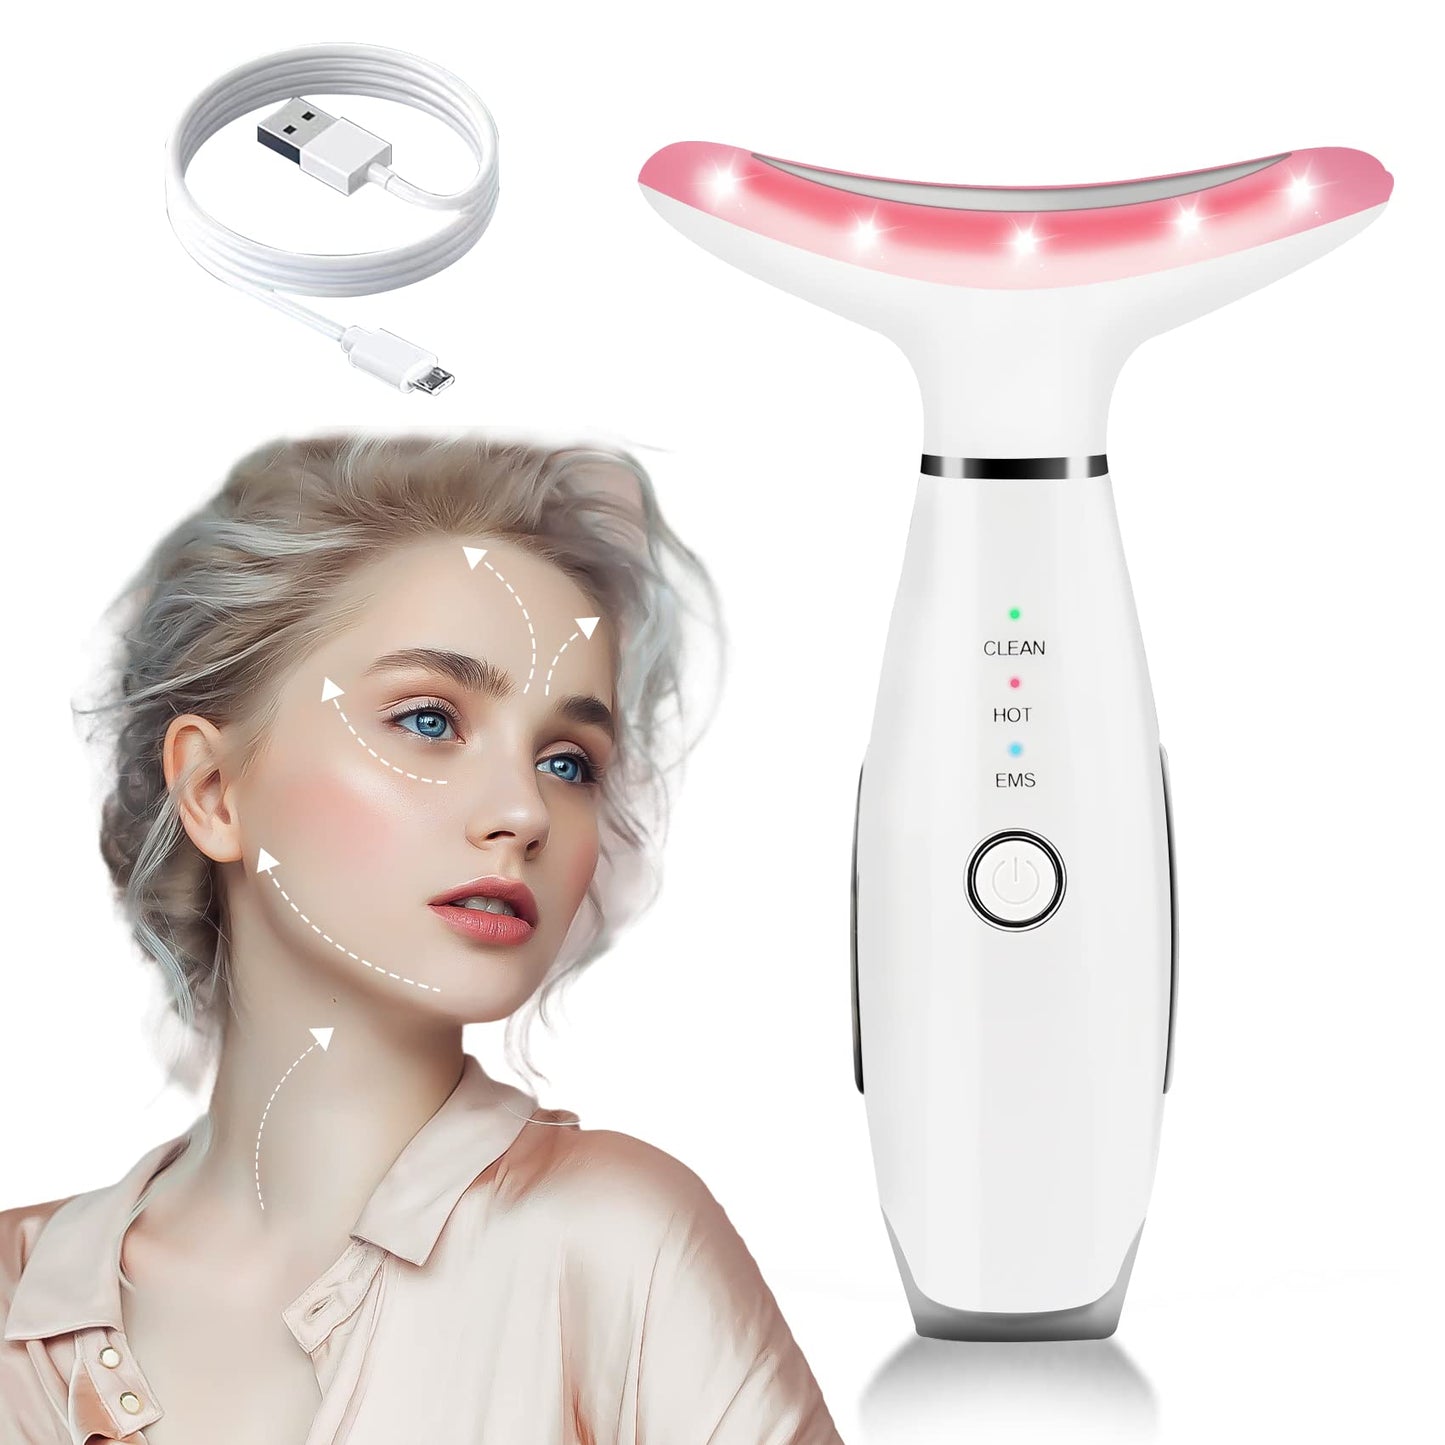 3-in-1 Facial Vibrating Massager for Face and Neck, Based on Triple Action LED, Thermal, and Vibration Technologies for Skin Care,Improve,Firm,Tightening and Smooth